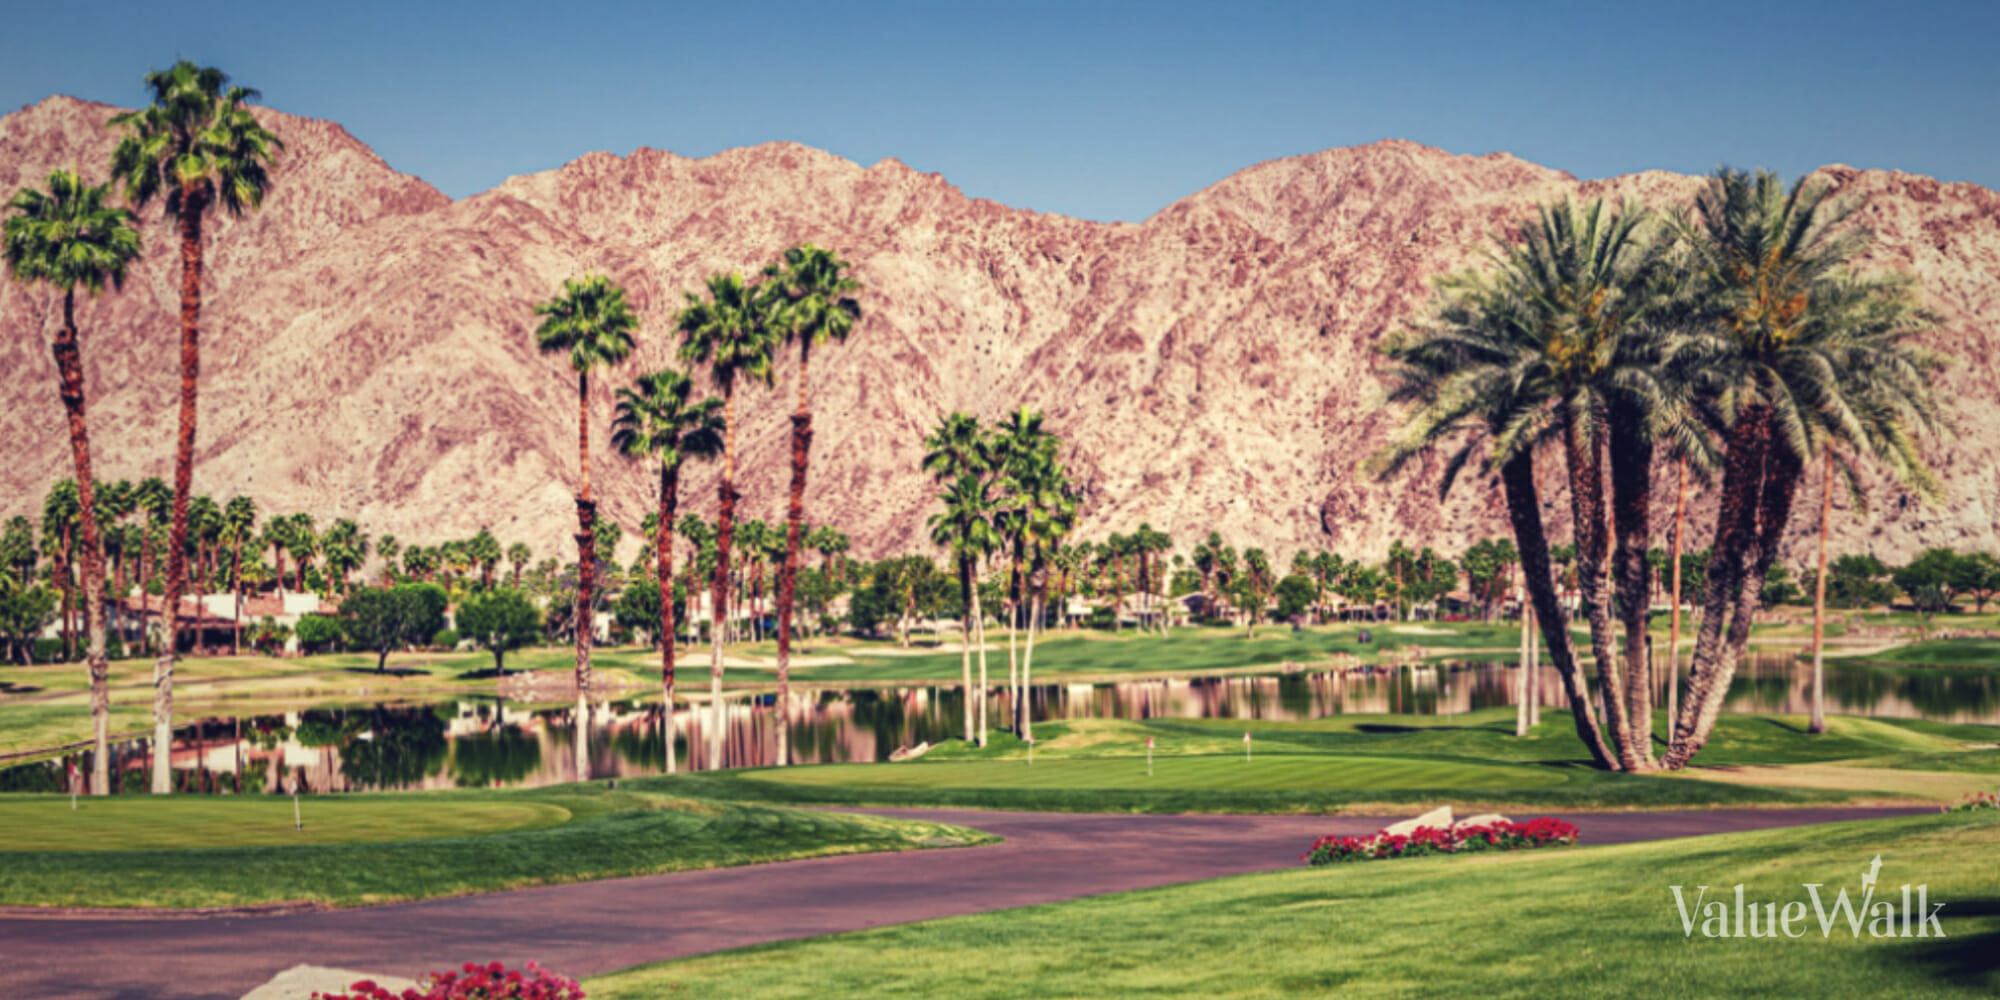 Stimulus Check From Palm Springs Of $800: UBI Program